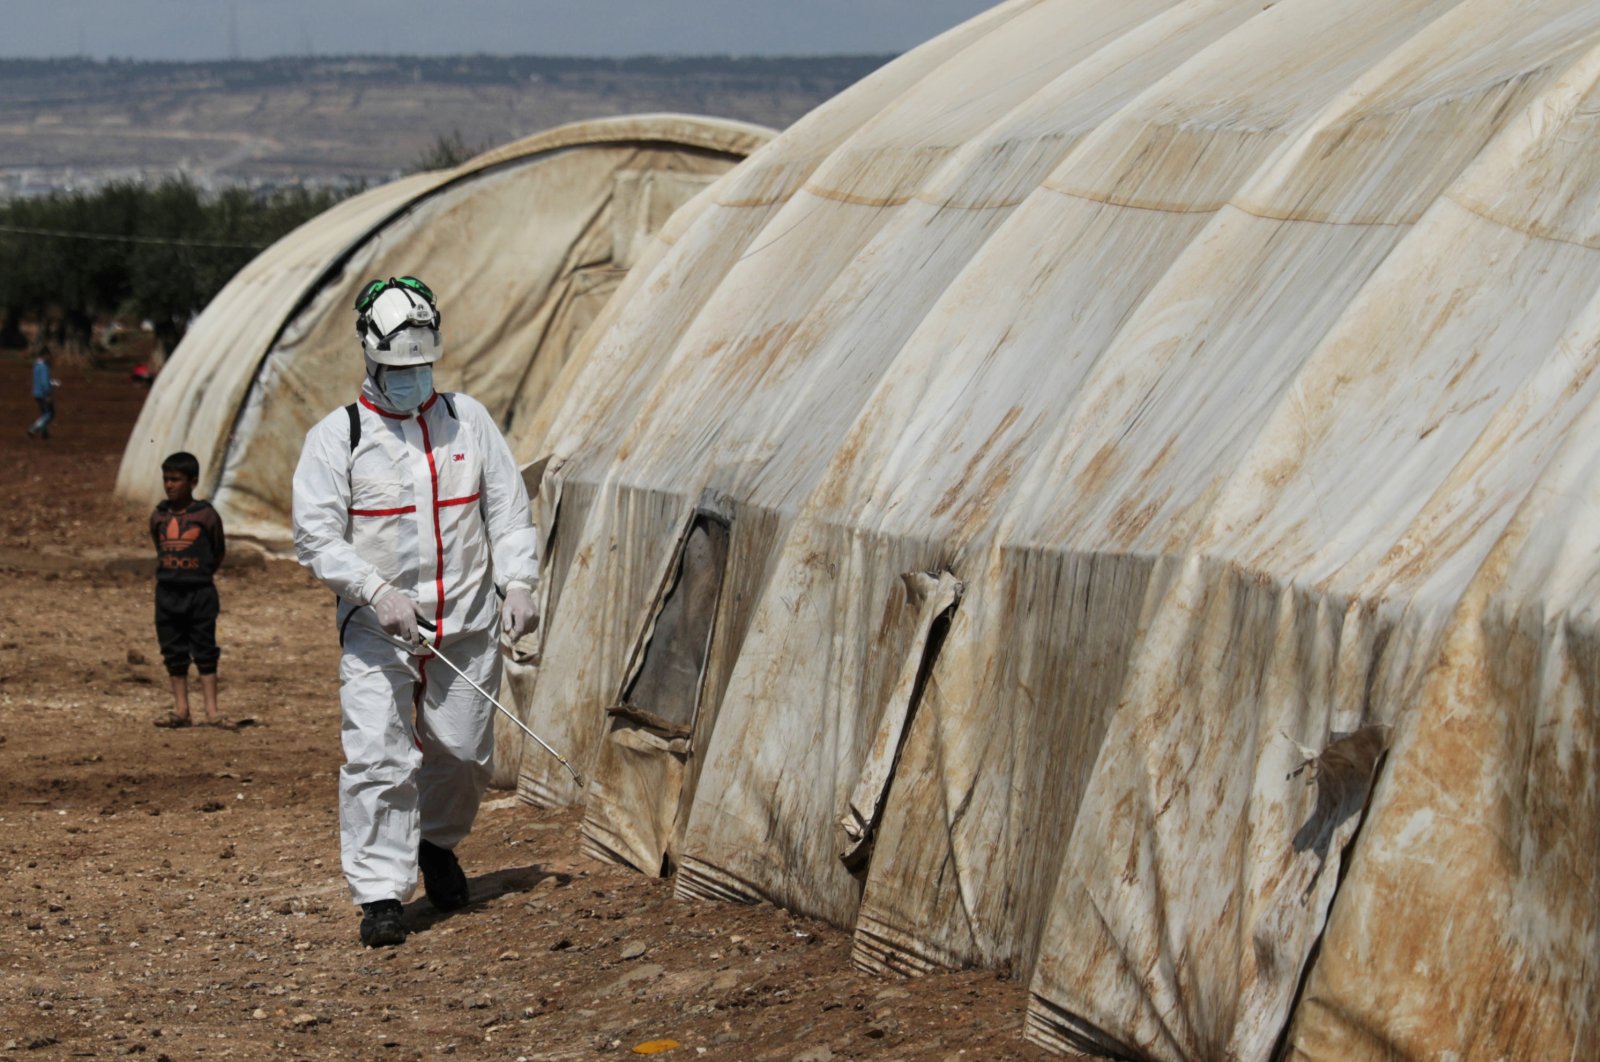 A member of the Syrian Civil Defense sanitizes a tent at the Bab Al-Nour internally displaced persons camp, Azaz, March 26, 2020. (REUTERS Photo)